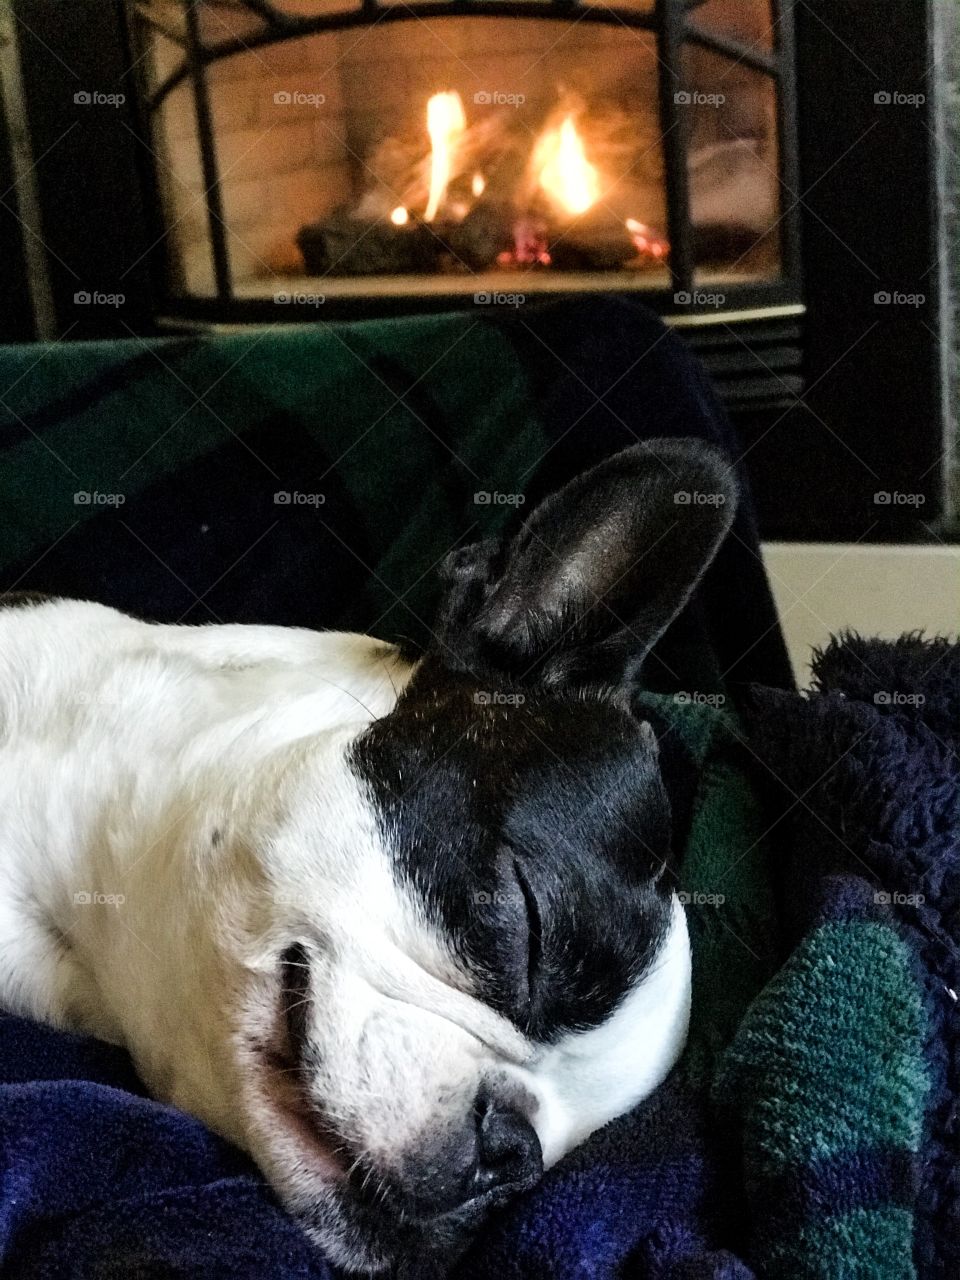 Gloomy rainy days require; a comfy chair where you can stretch out & put your feet up, UV lights to mimic sunlight, someone to cuddle with, a warm blanket, hot tea & a remotely controlled gas fireplace. The dog & I are slipping into hibernation mode.